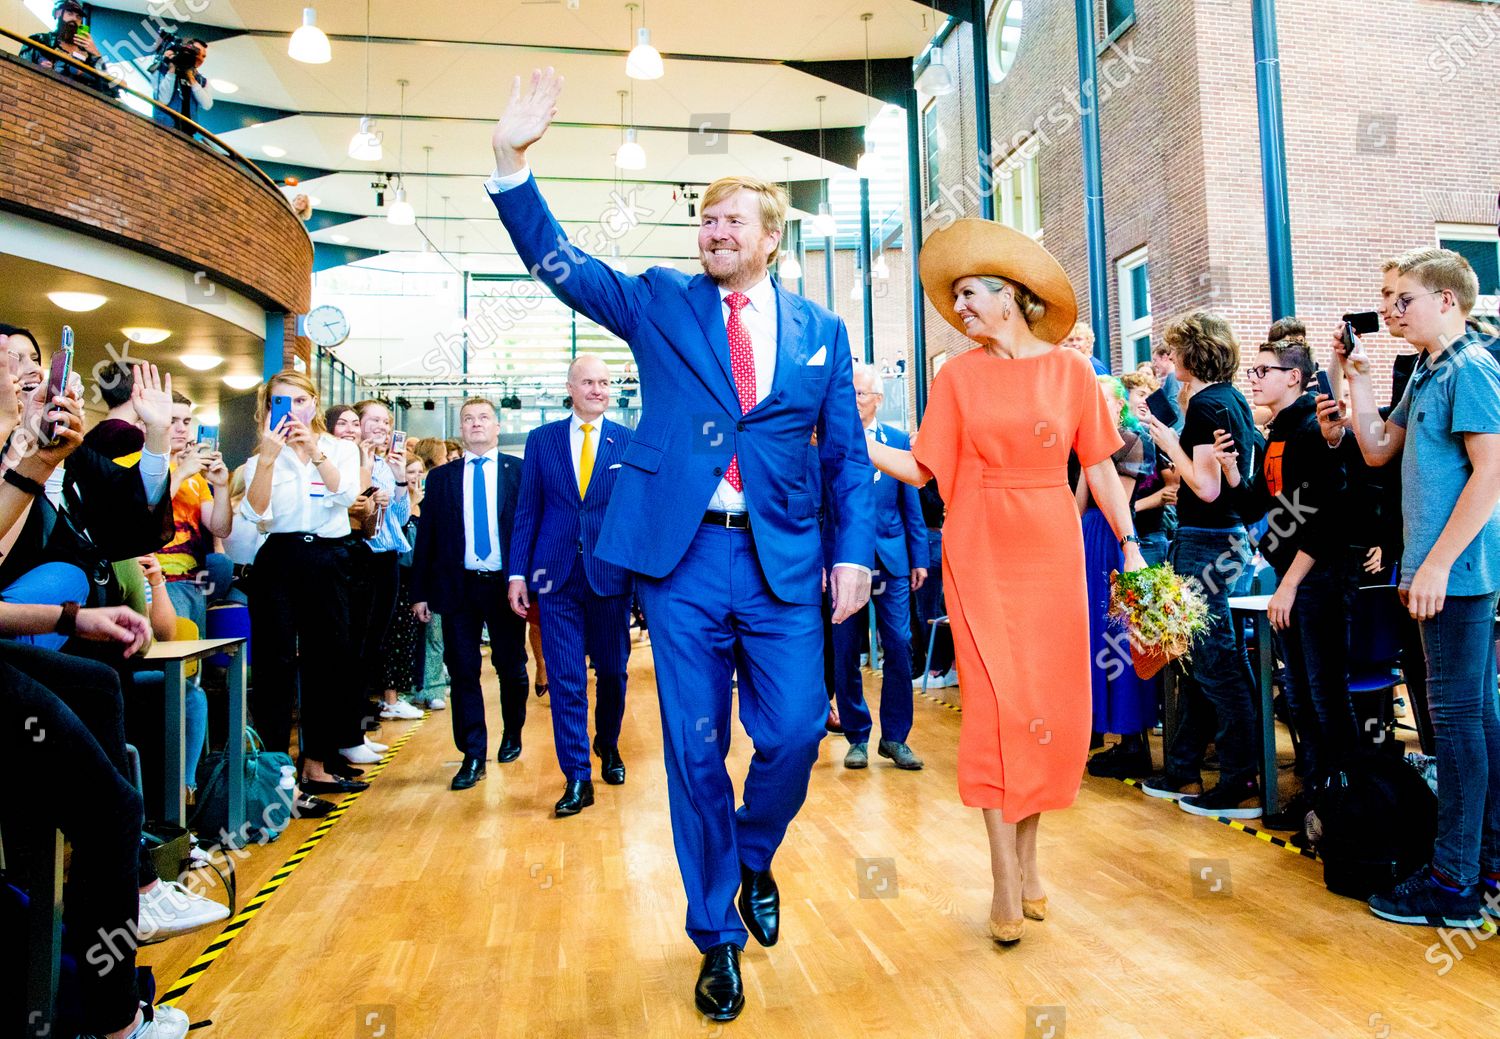 king-willem-alexander-and-queen-maxima-visit-to-south-east-friesland-the-netherlands-shutterstock-editorial-10779996bb.jpg